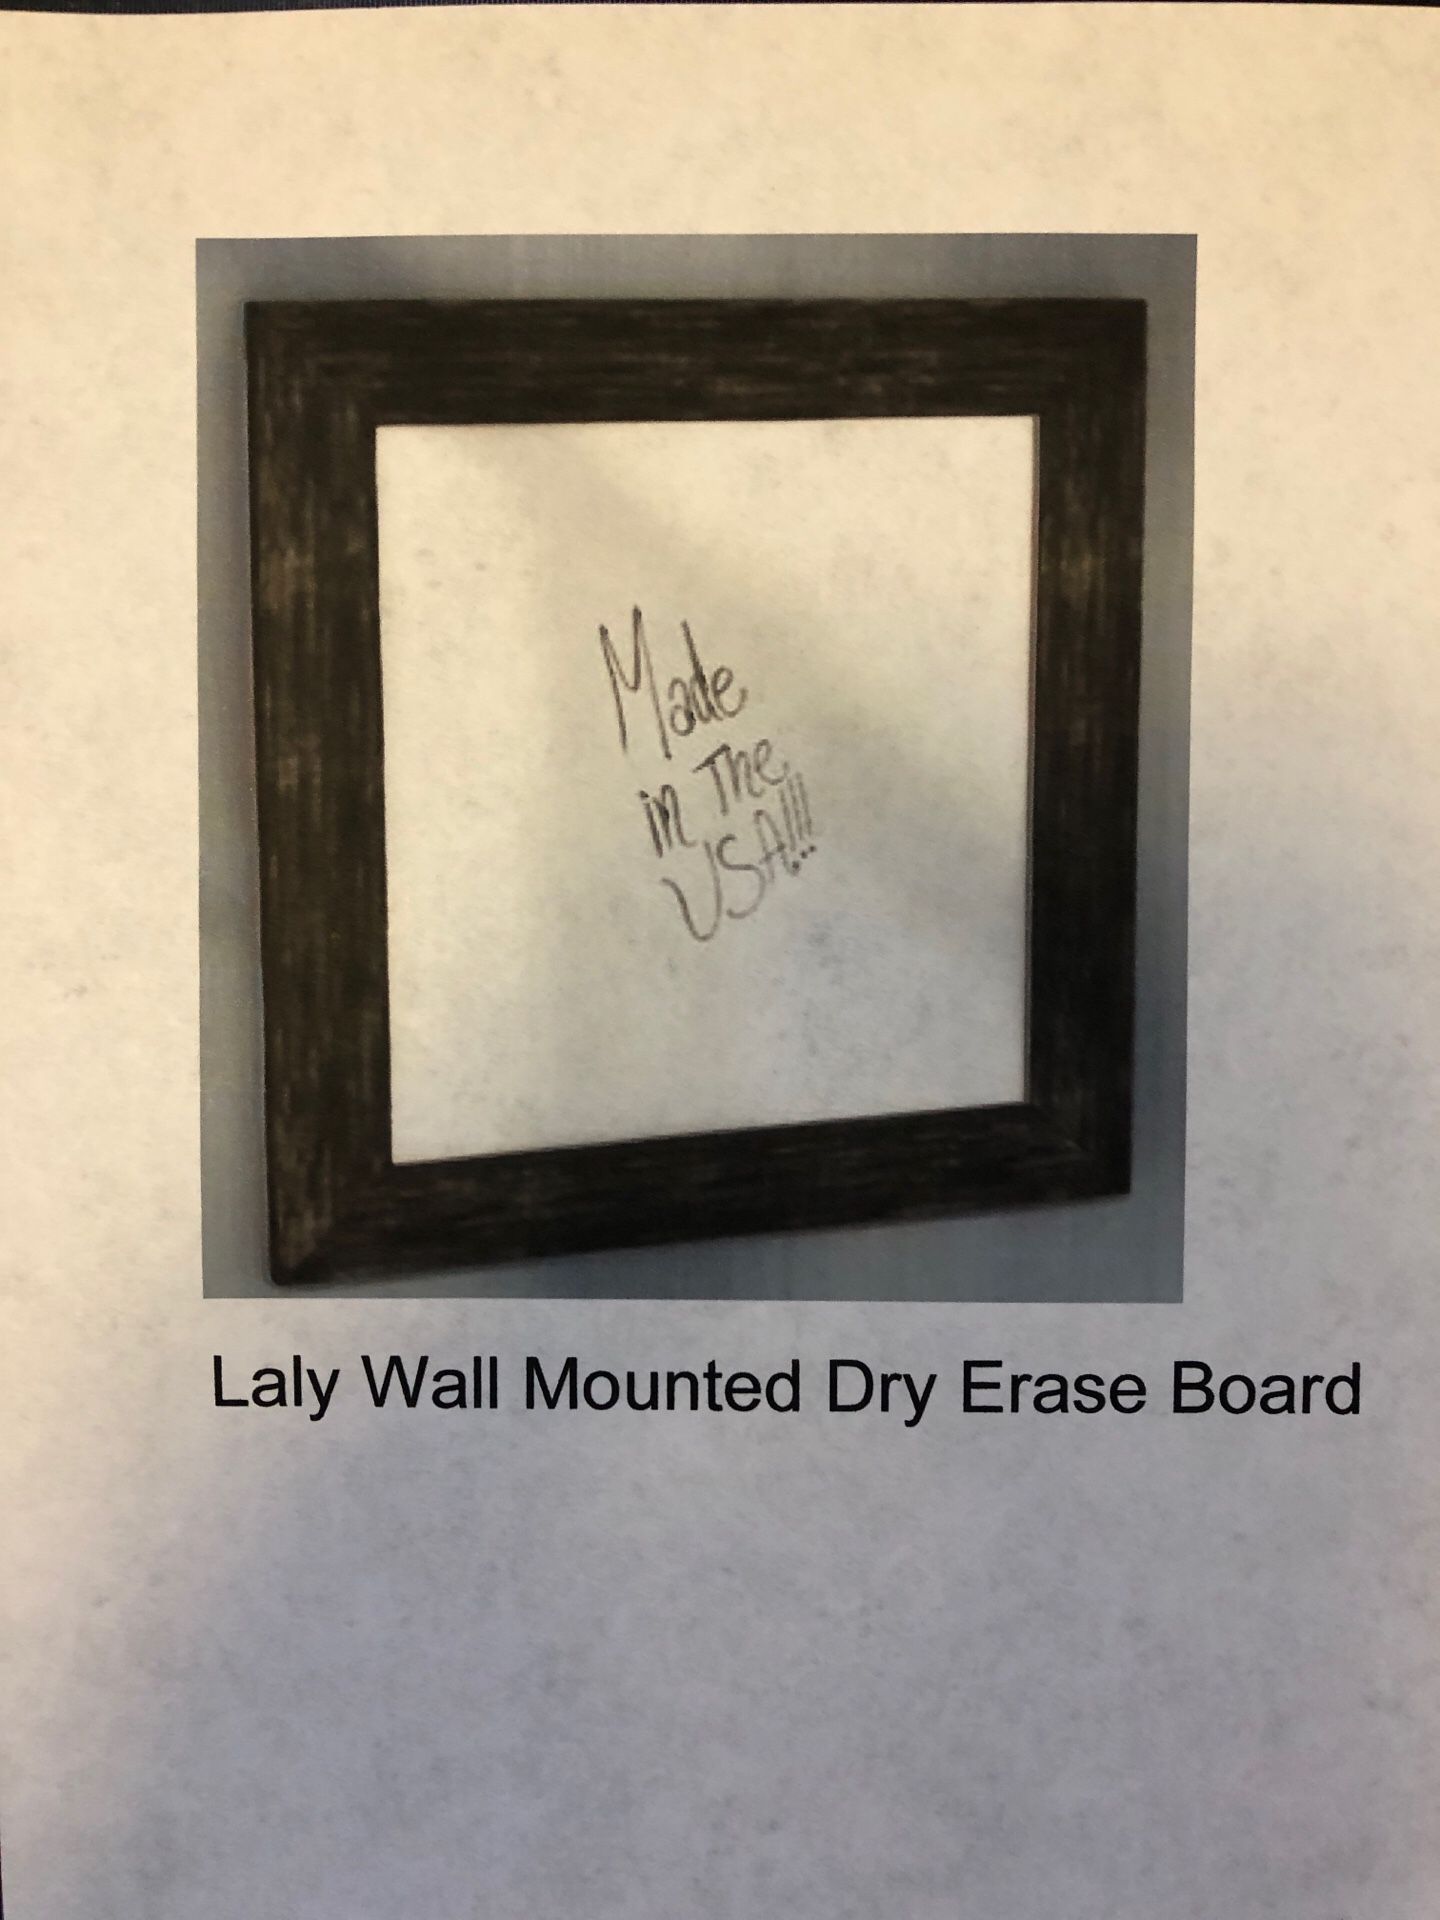 Laly Wall Mounted Dry Erase Board